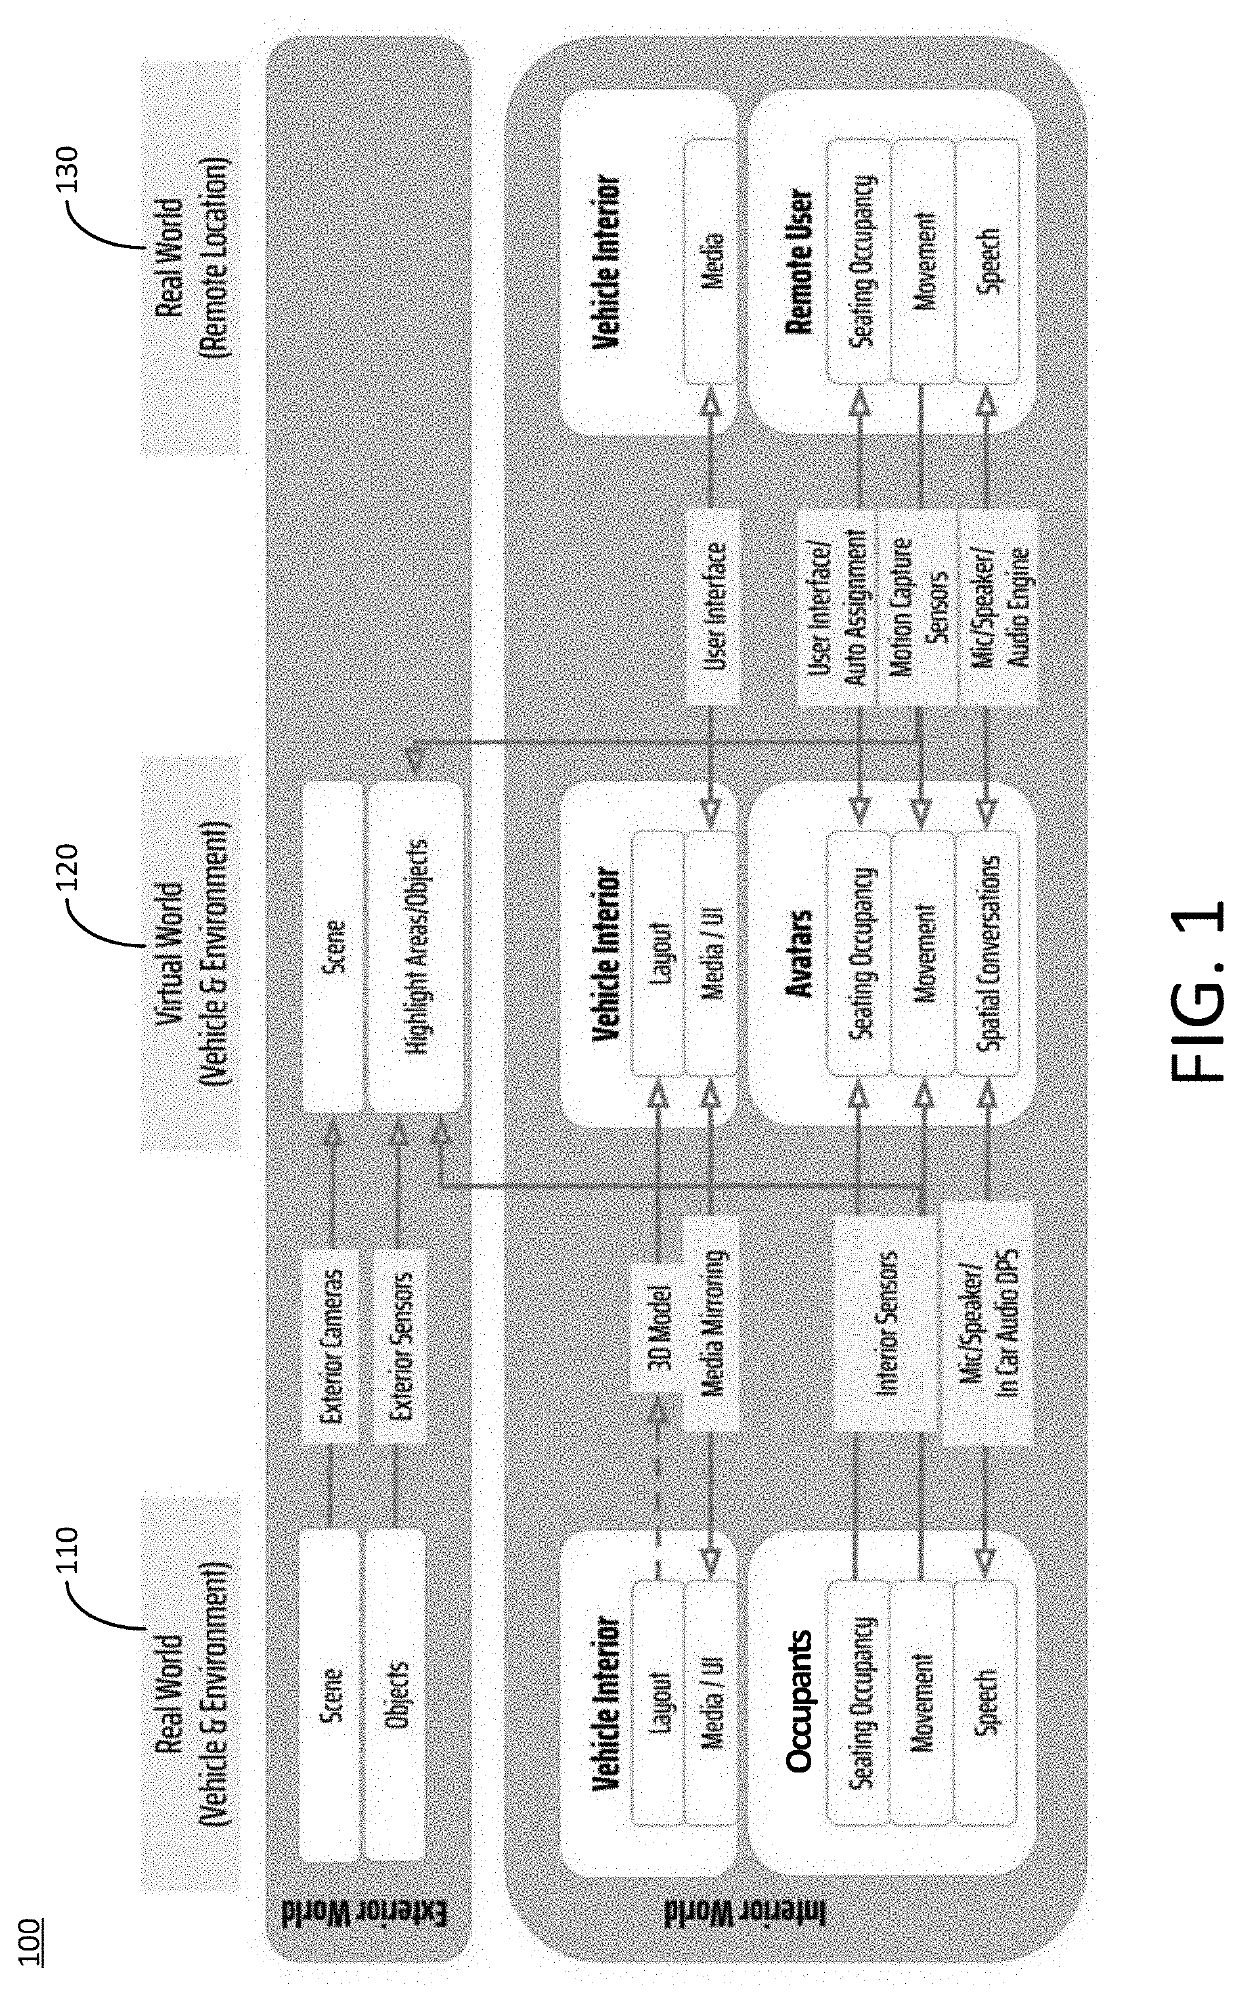 Shared environment for vehicle occupant and remote user